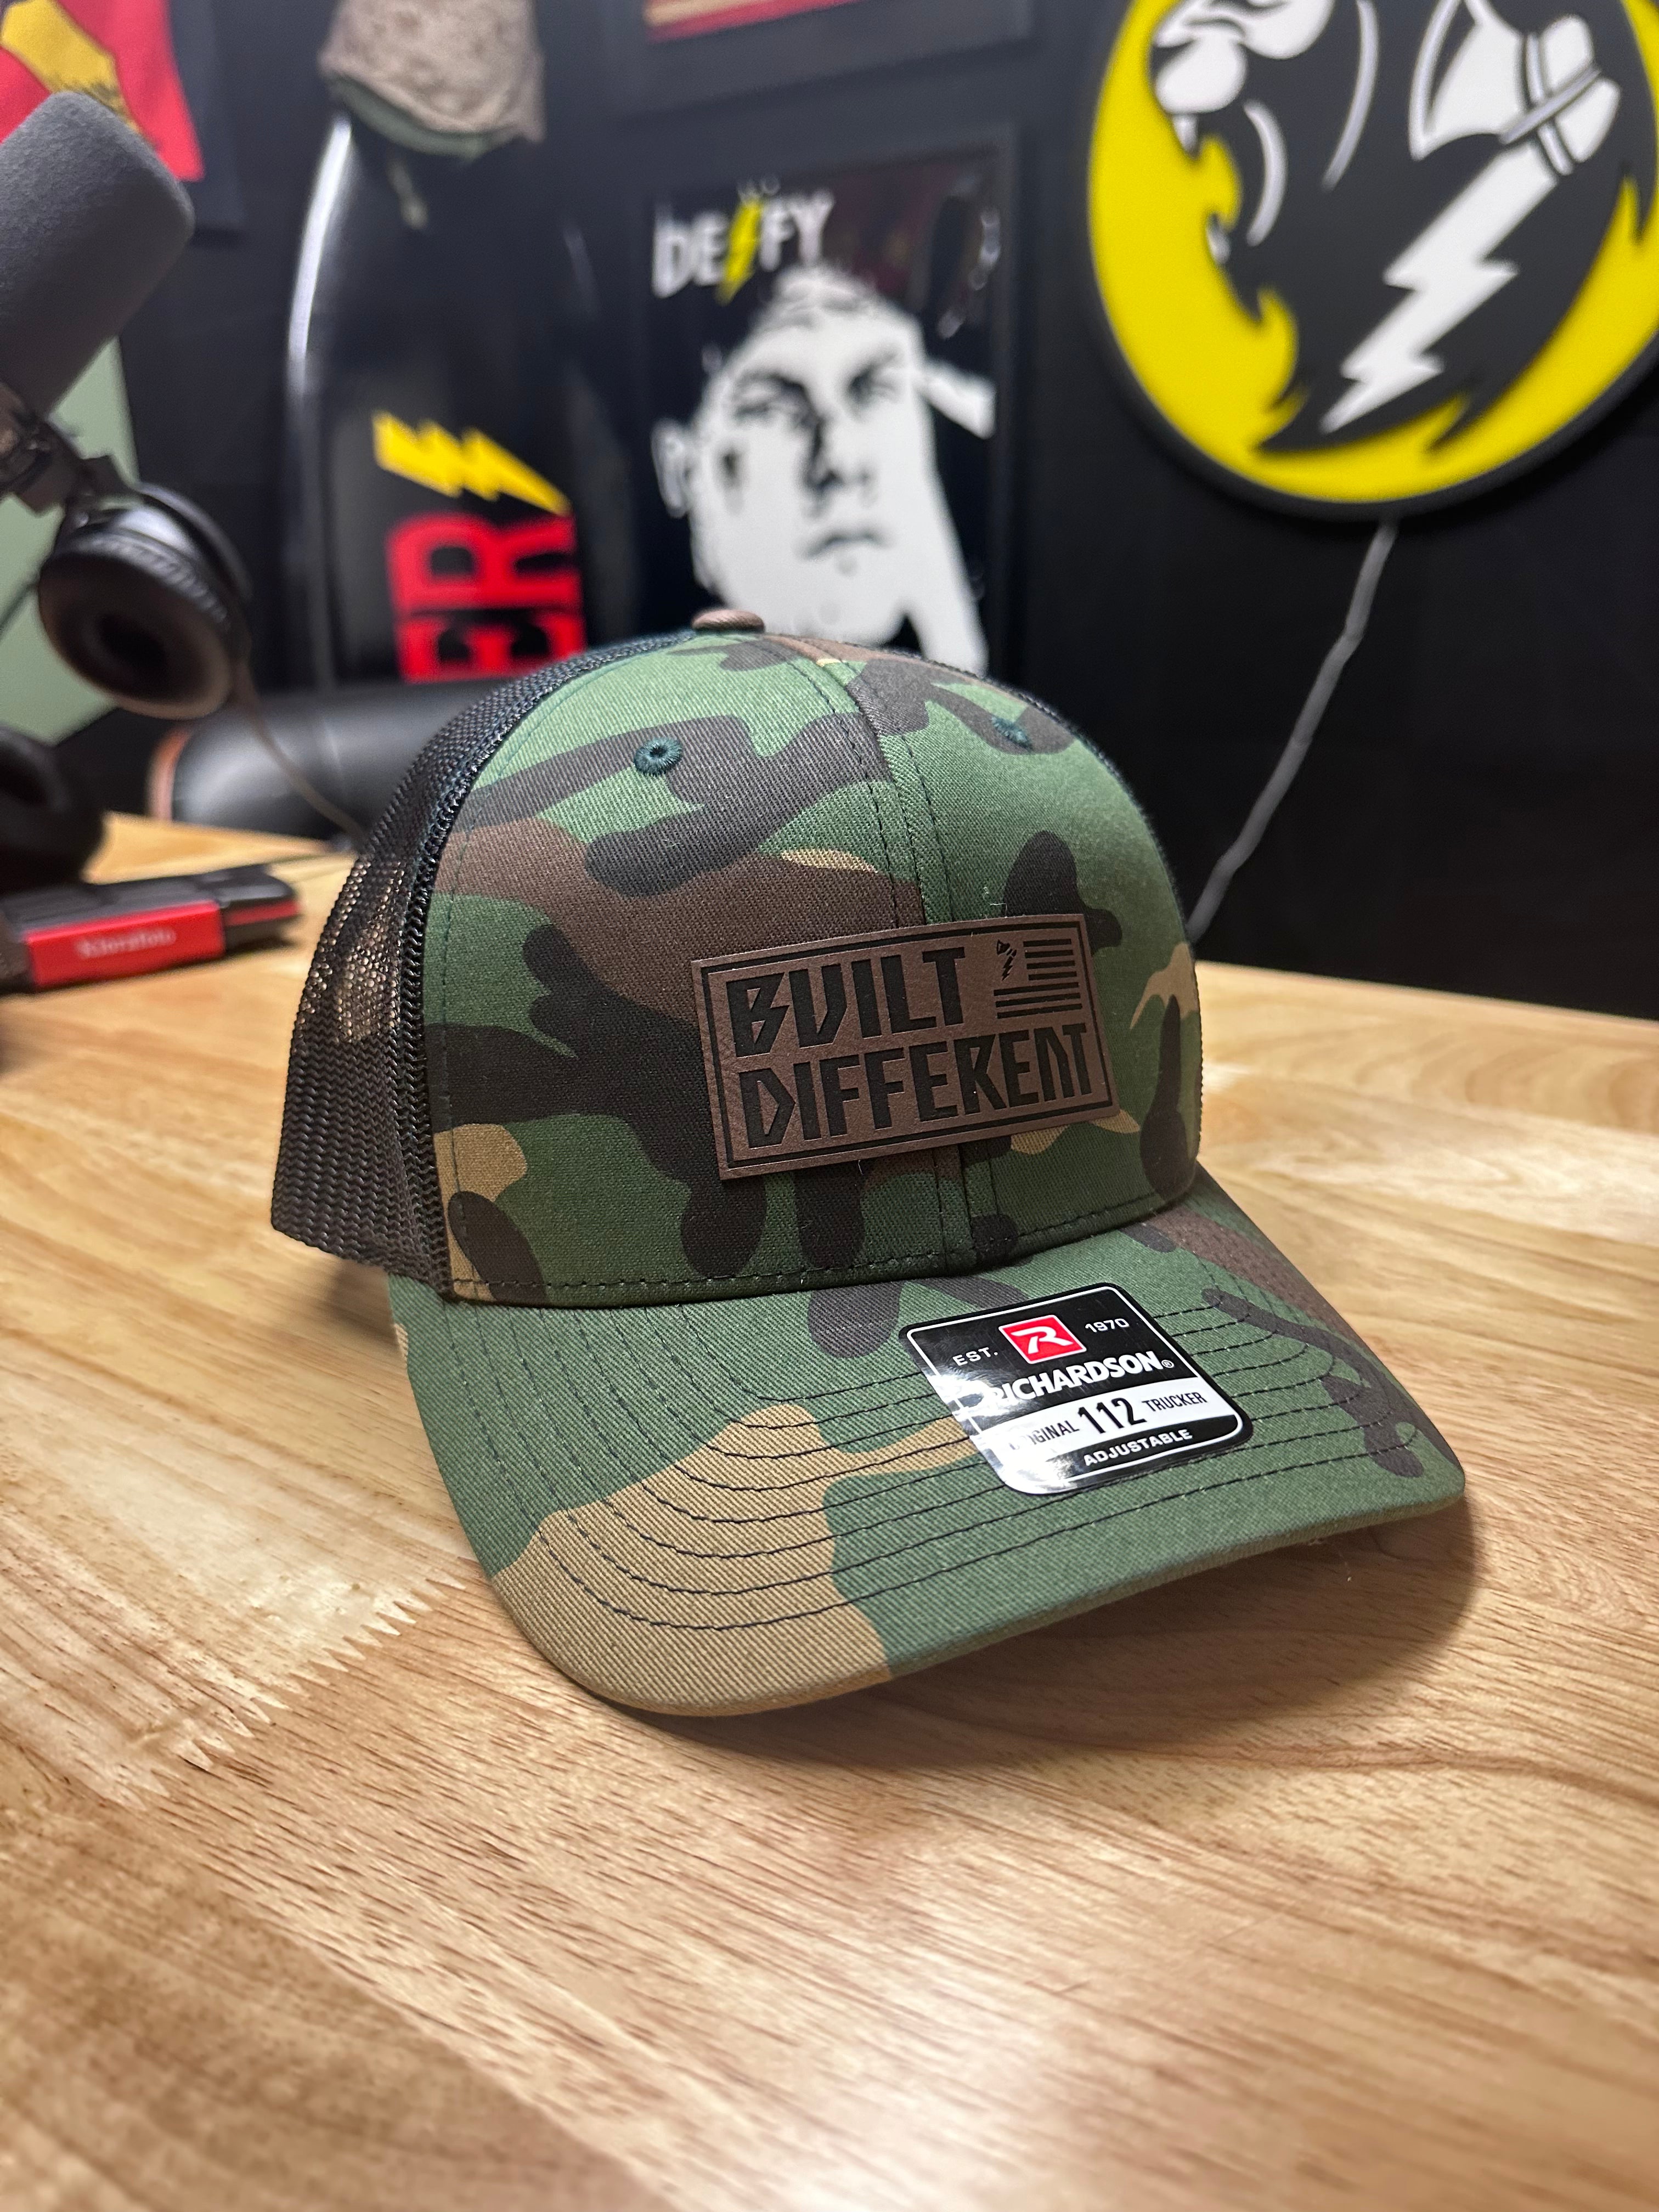 Built Different Leather Patch - Woodland Camo Snapback Hat